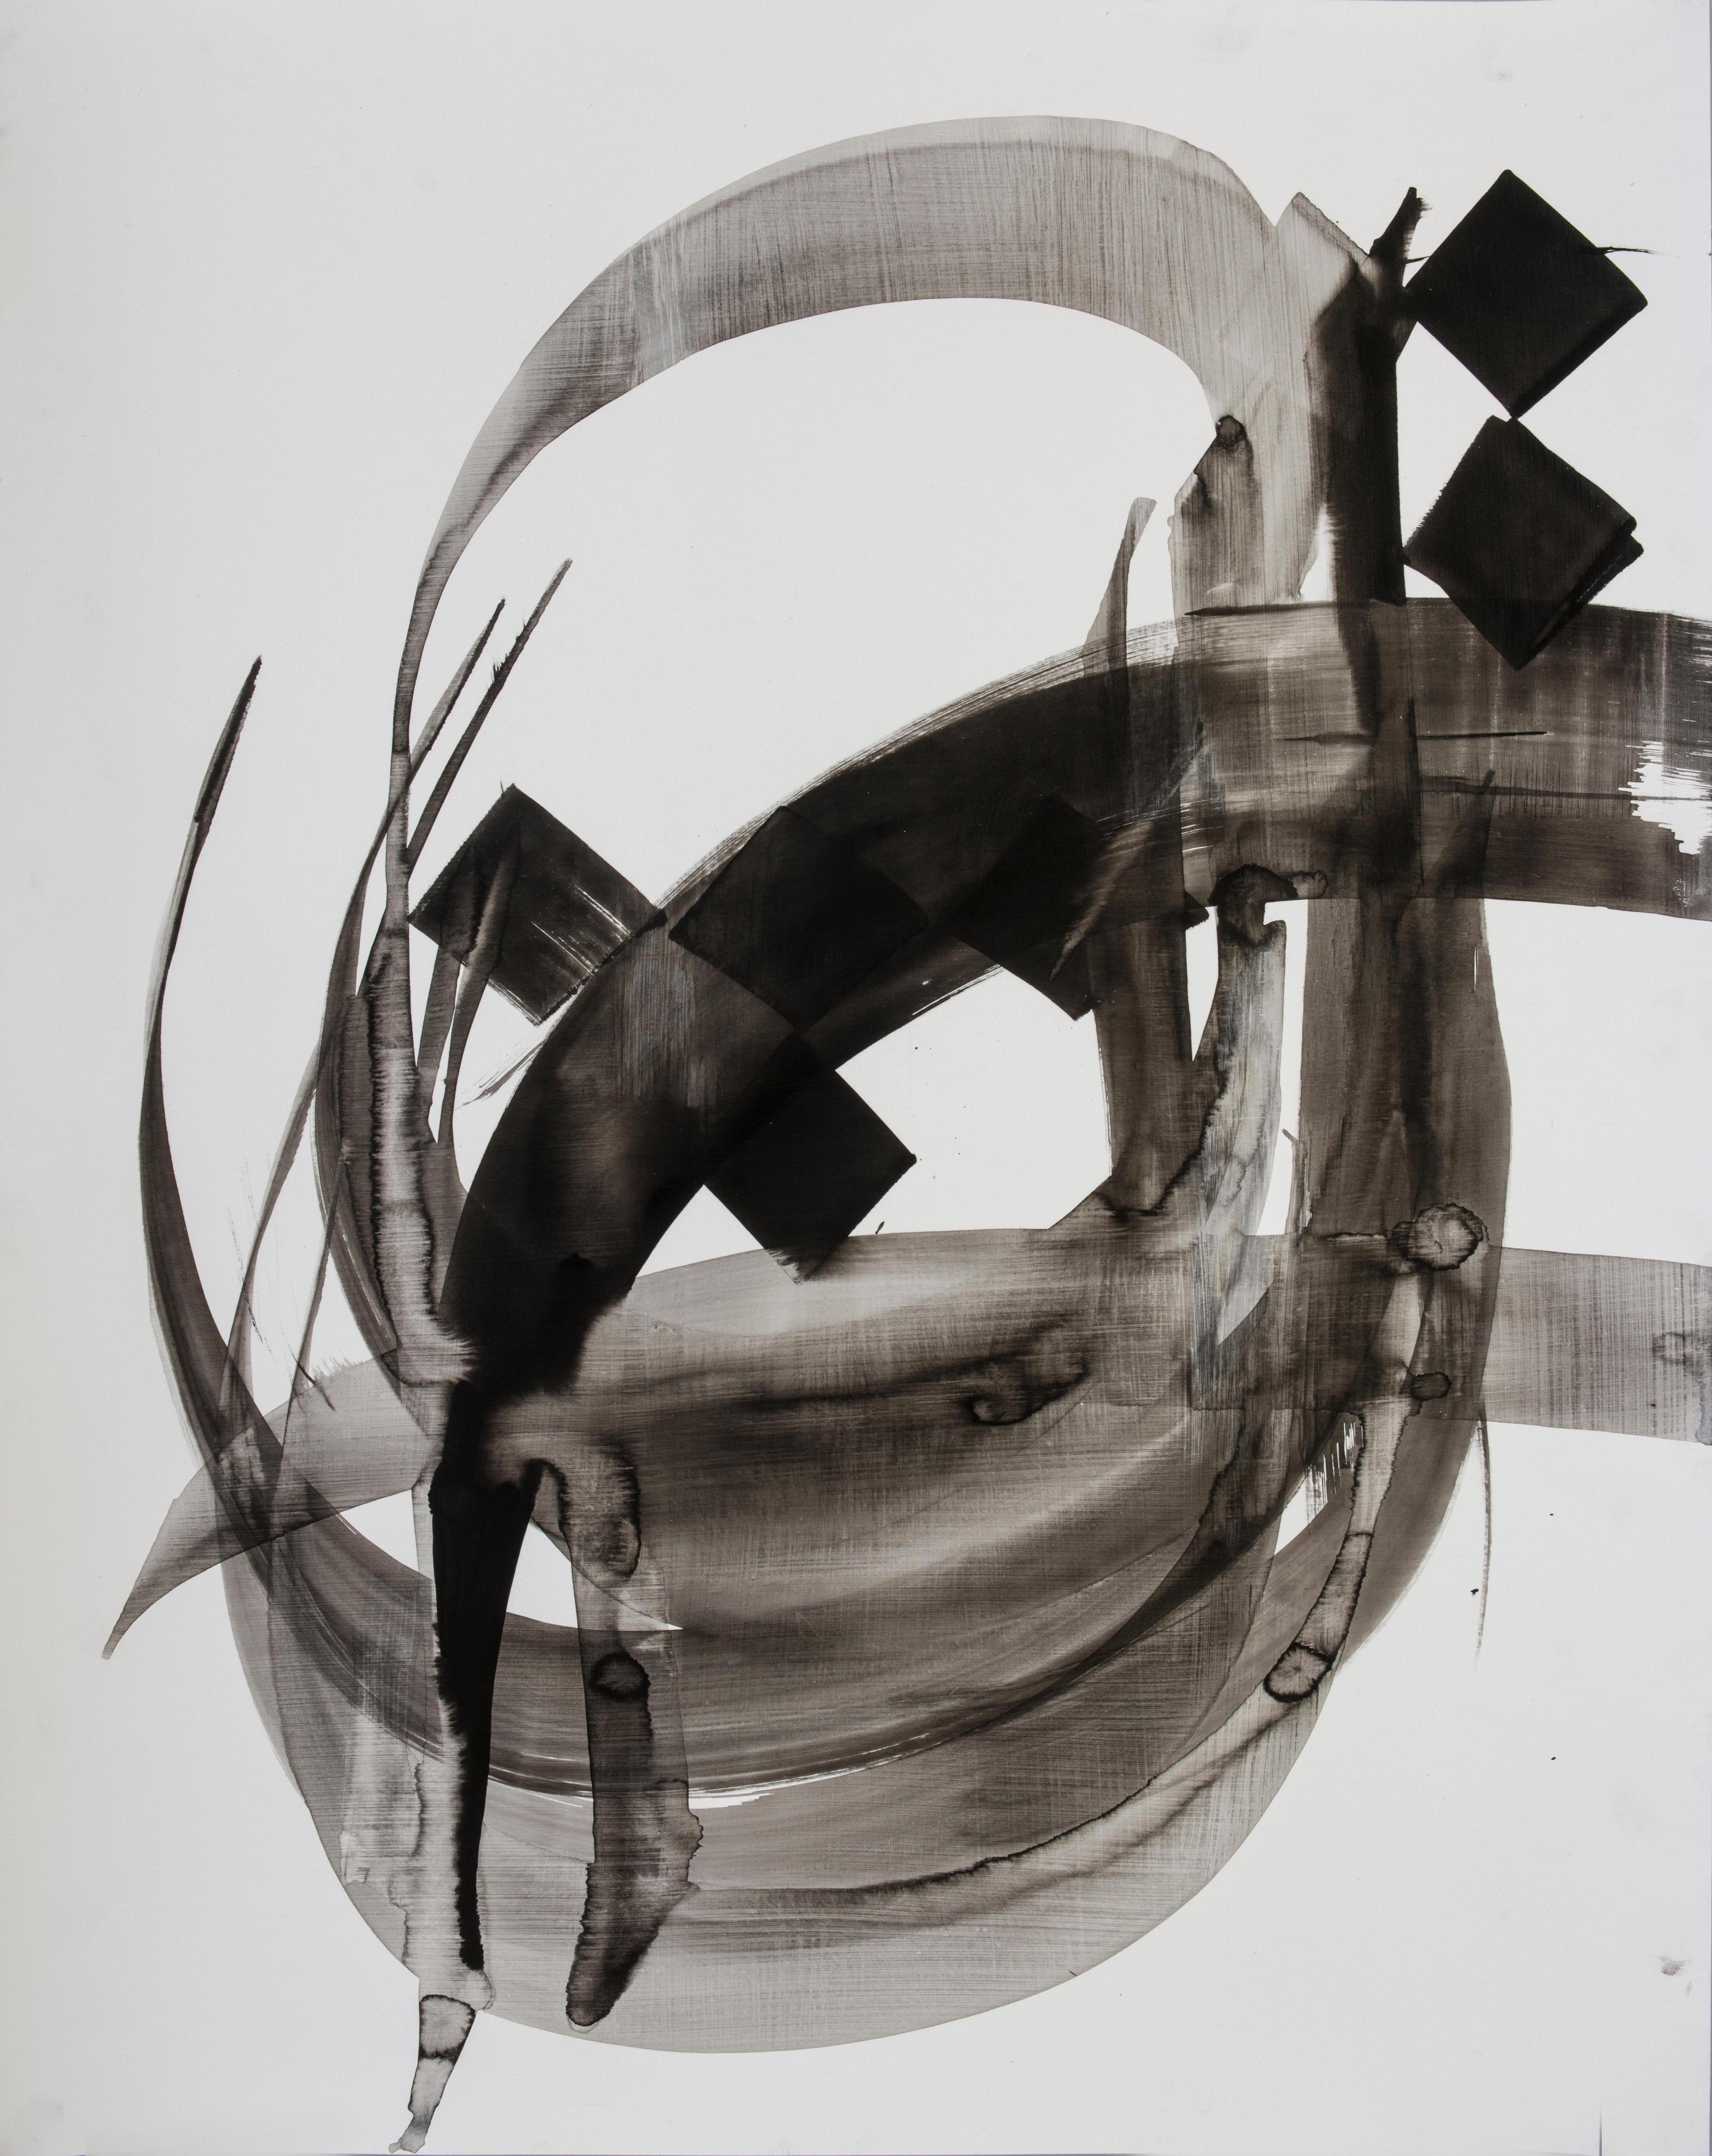 Etude 11 - abstract calligraphy ink drawing / painting on paper in black & white